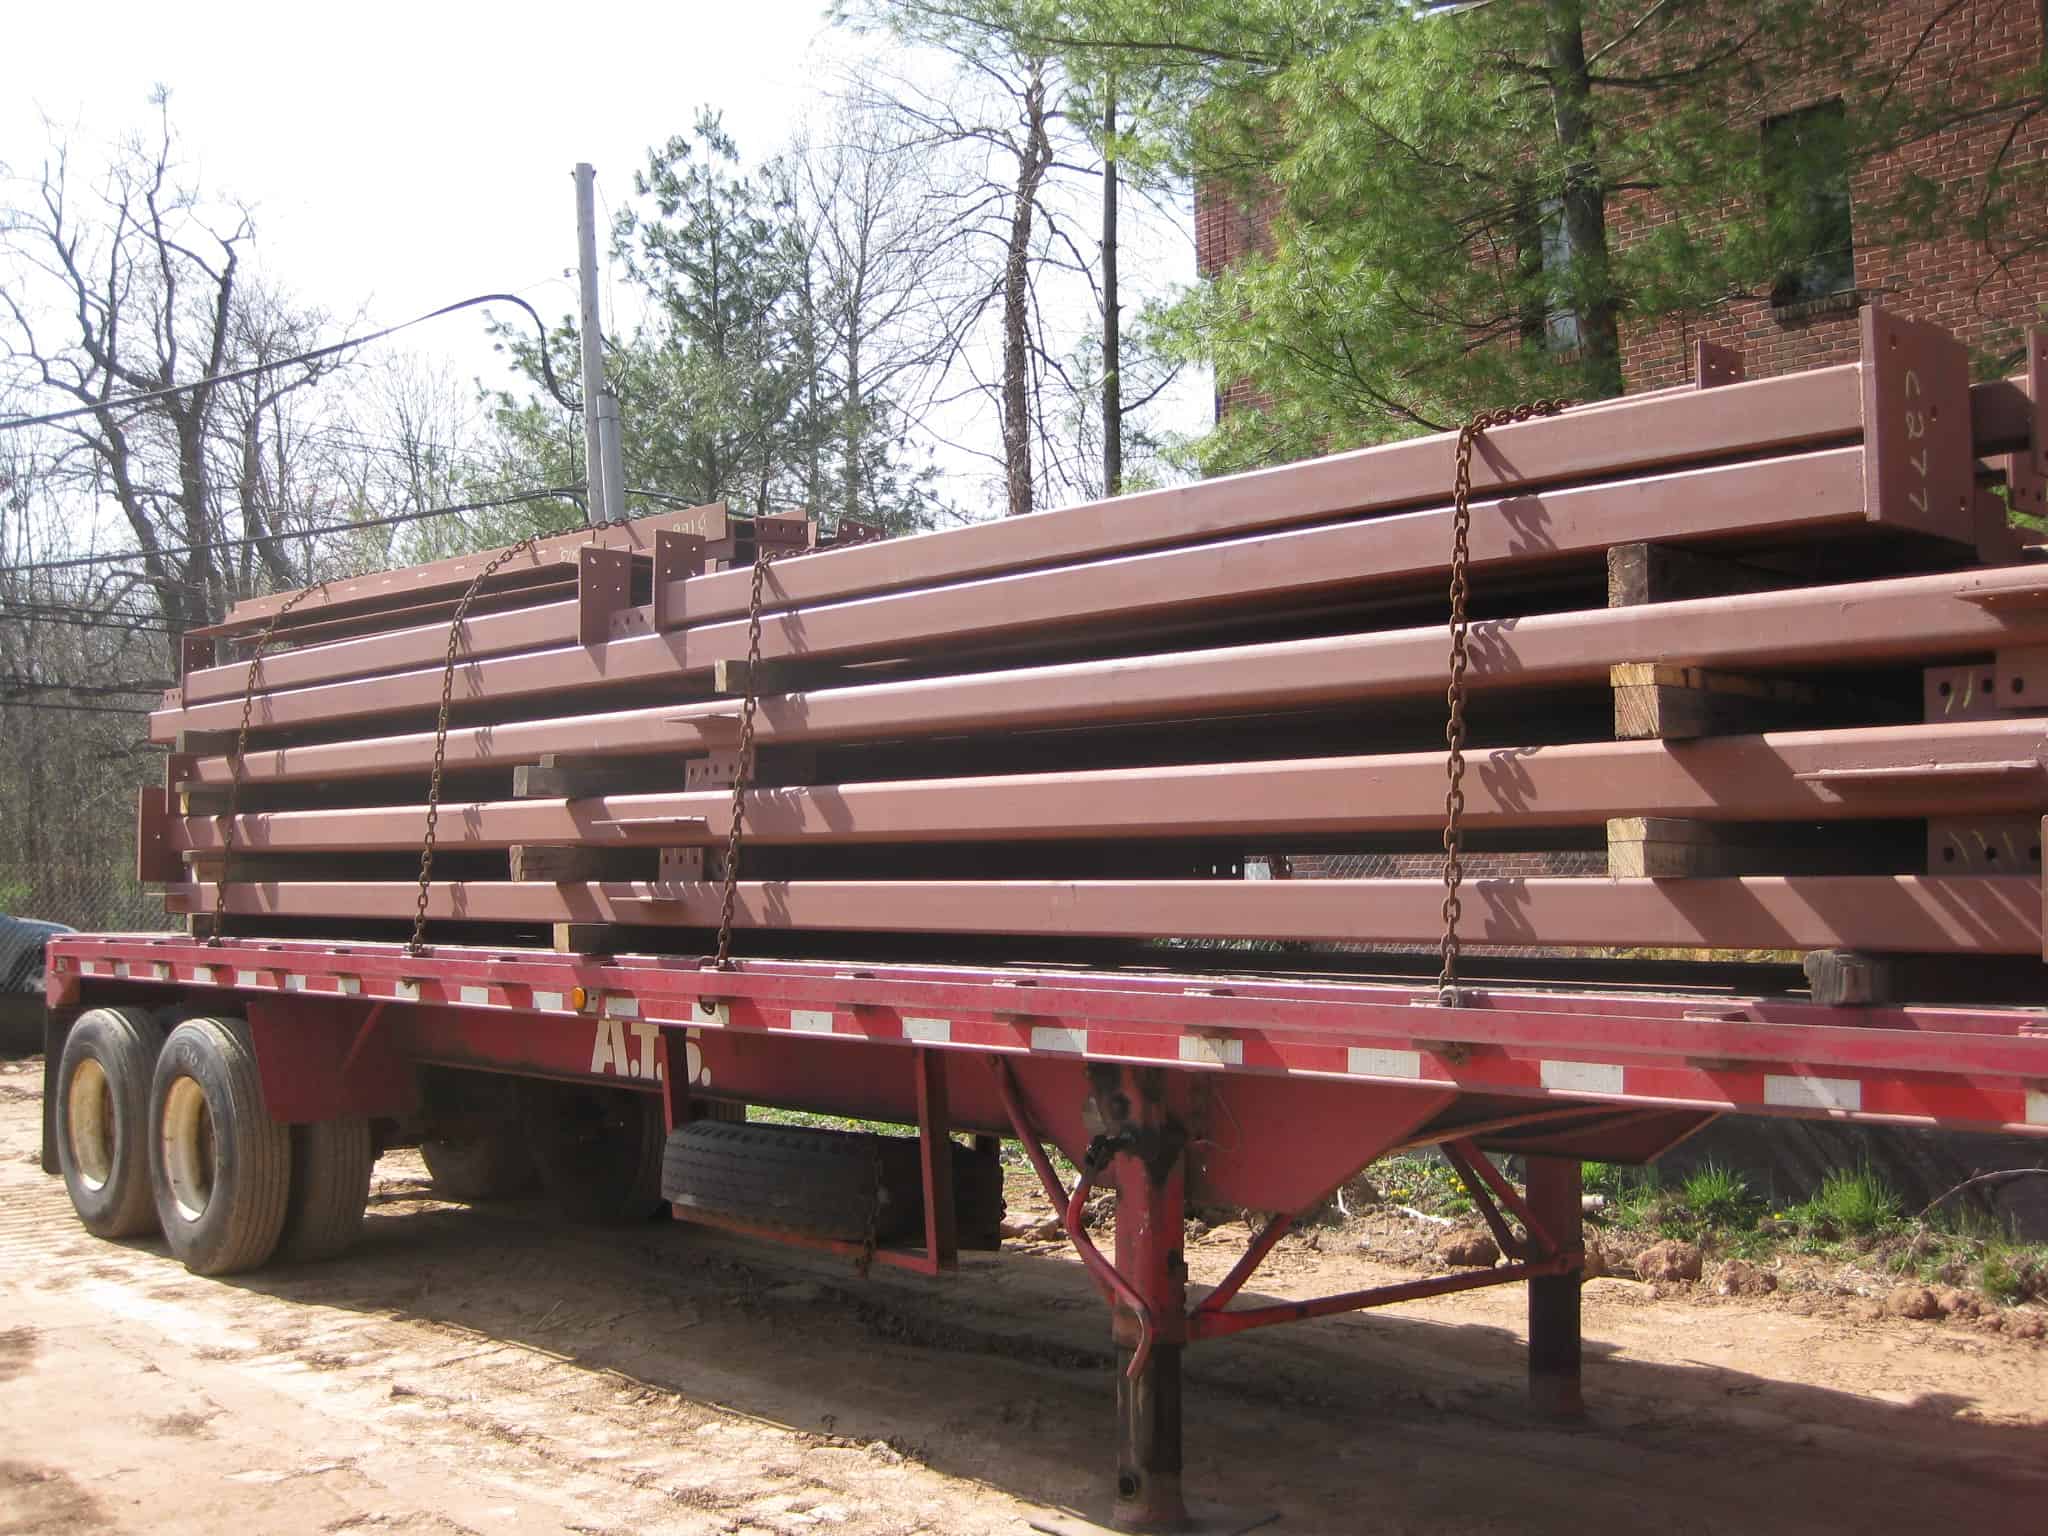 Steel Erection Best Practice For Unloading & Shaking Out Columns